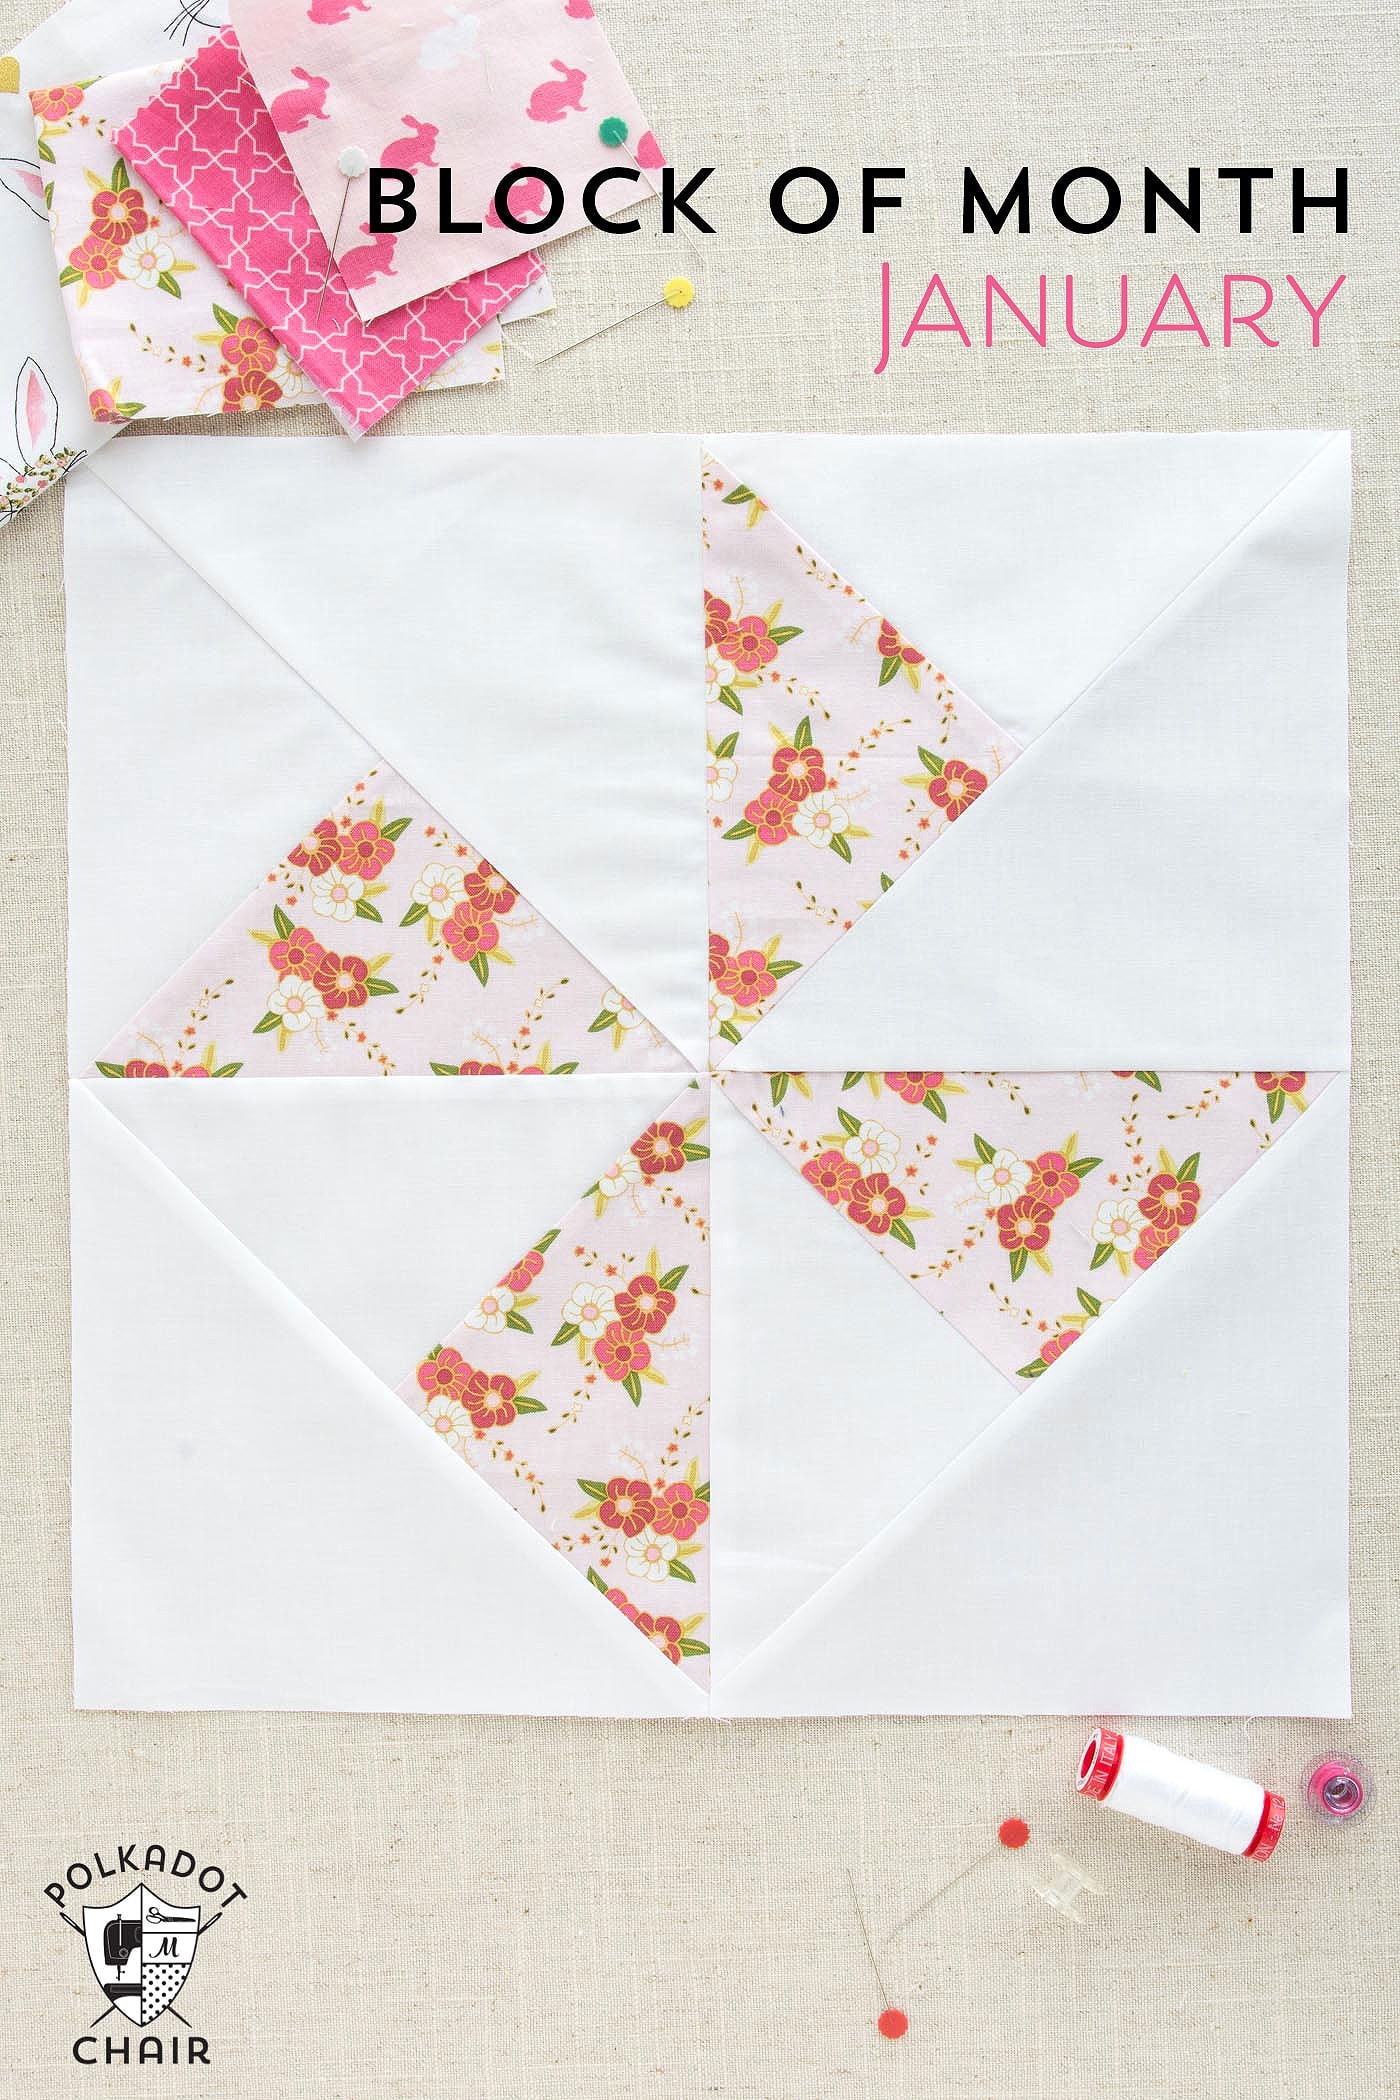 How to Make a Turnstile Quilt Block – January Block of the Month